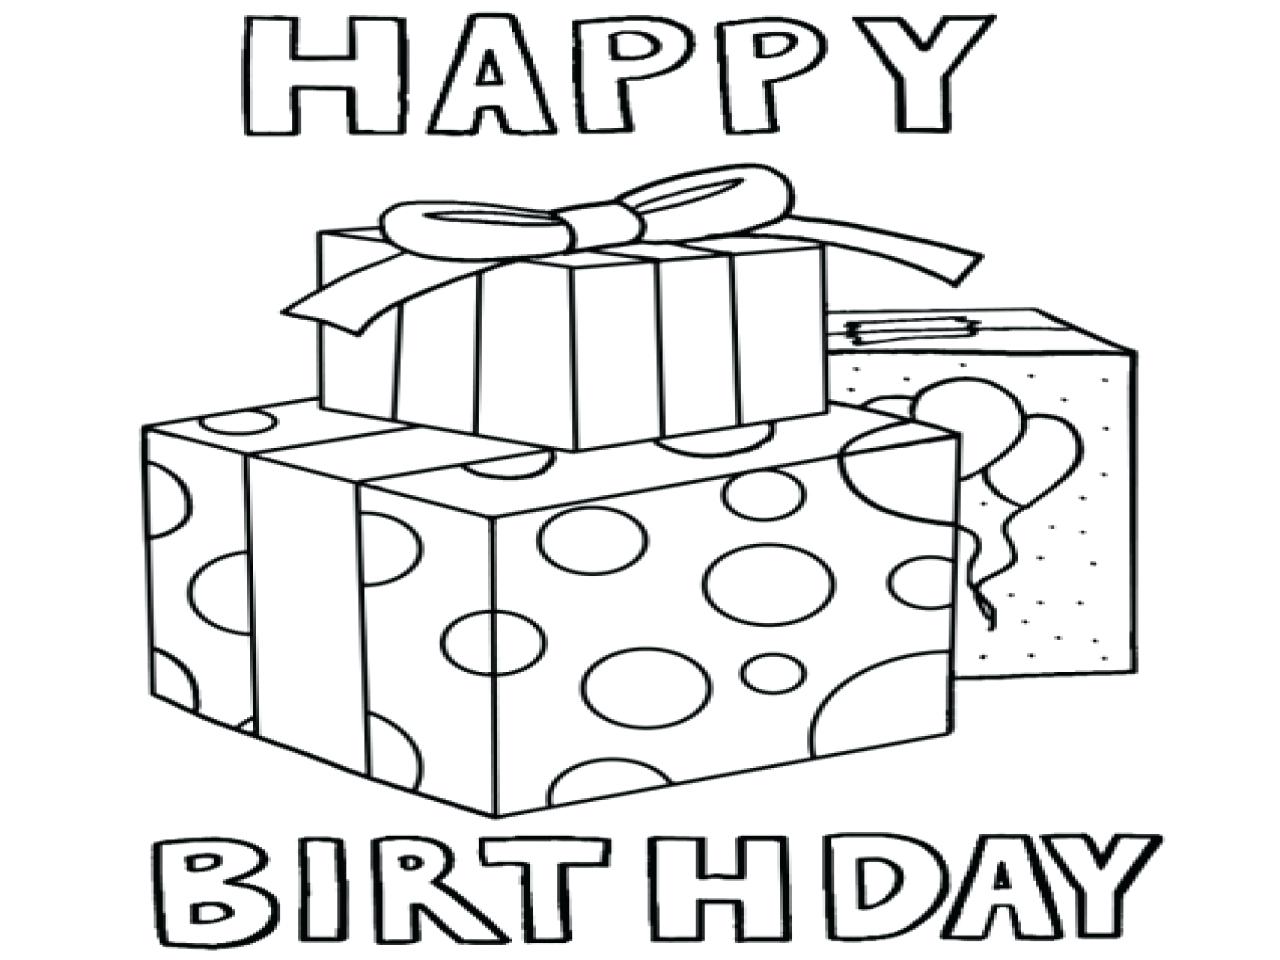 Happy Birthday Aunt Coloring Pages at GetColorings.com | Free printable ...